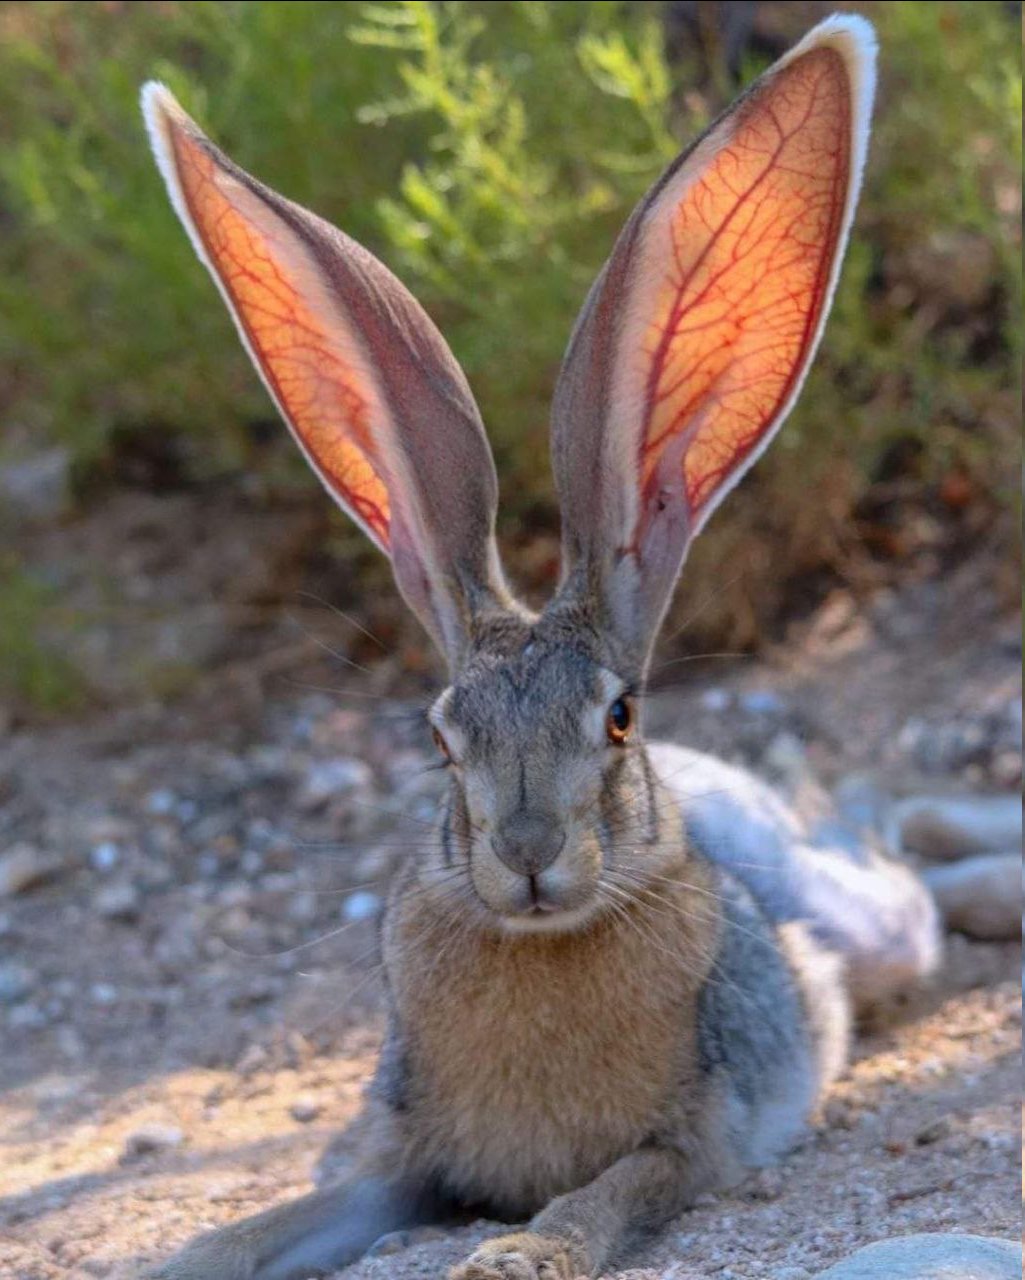 Hare with really large ears